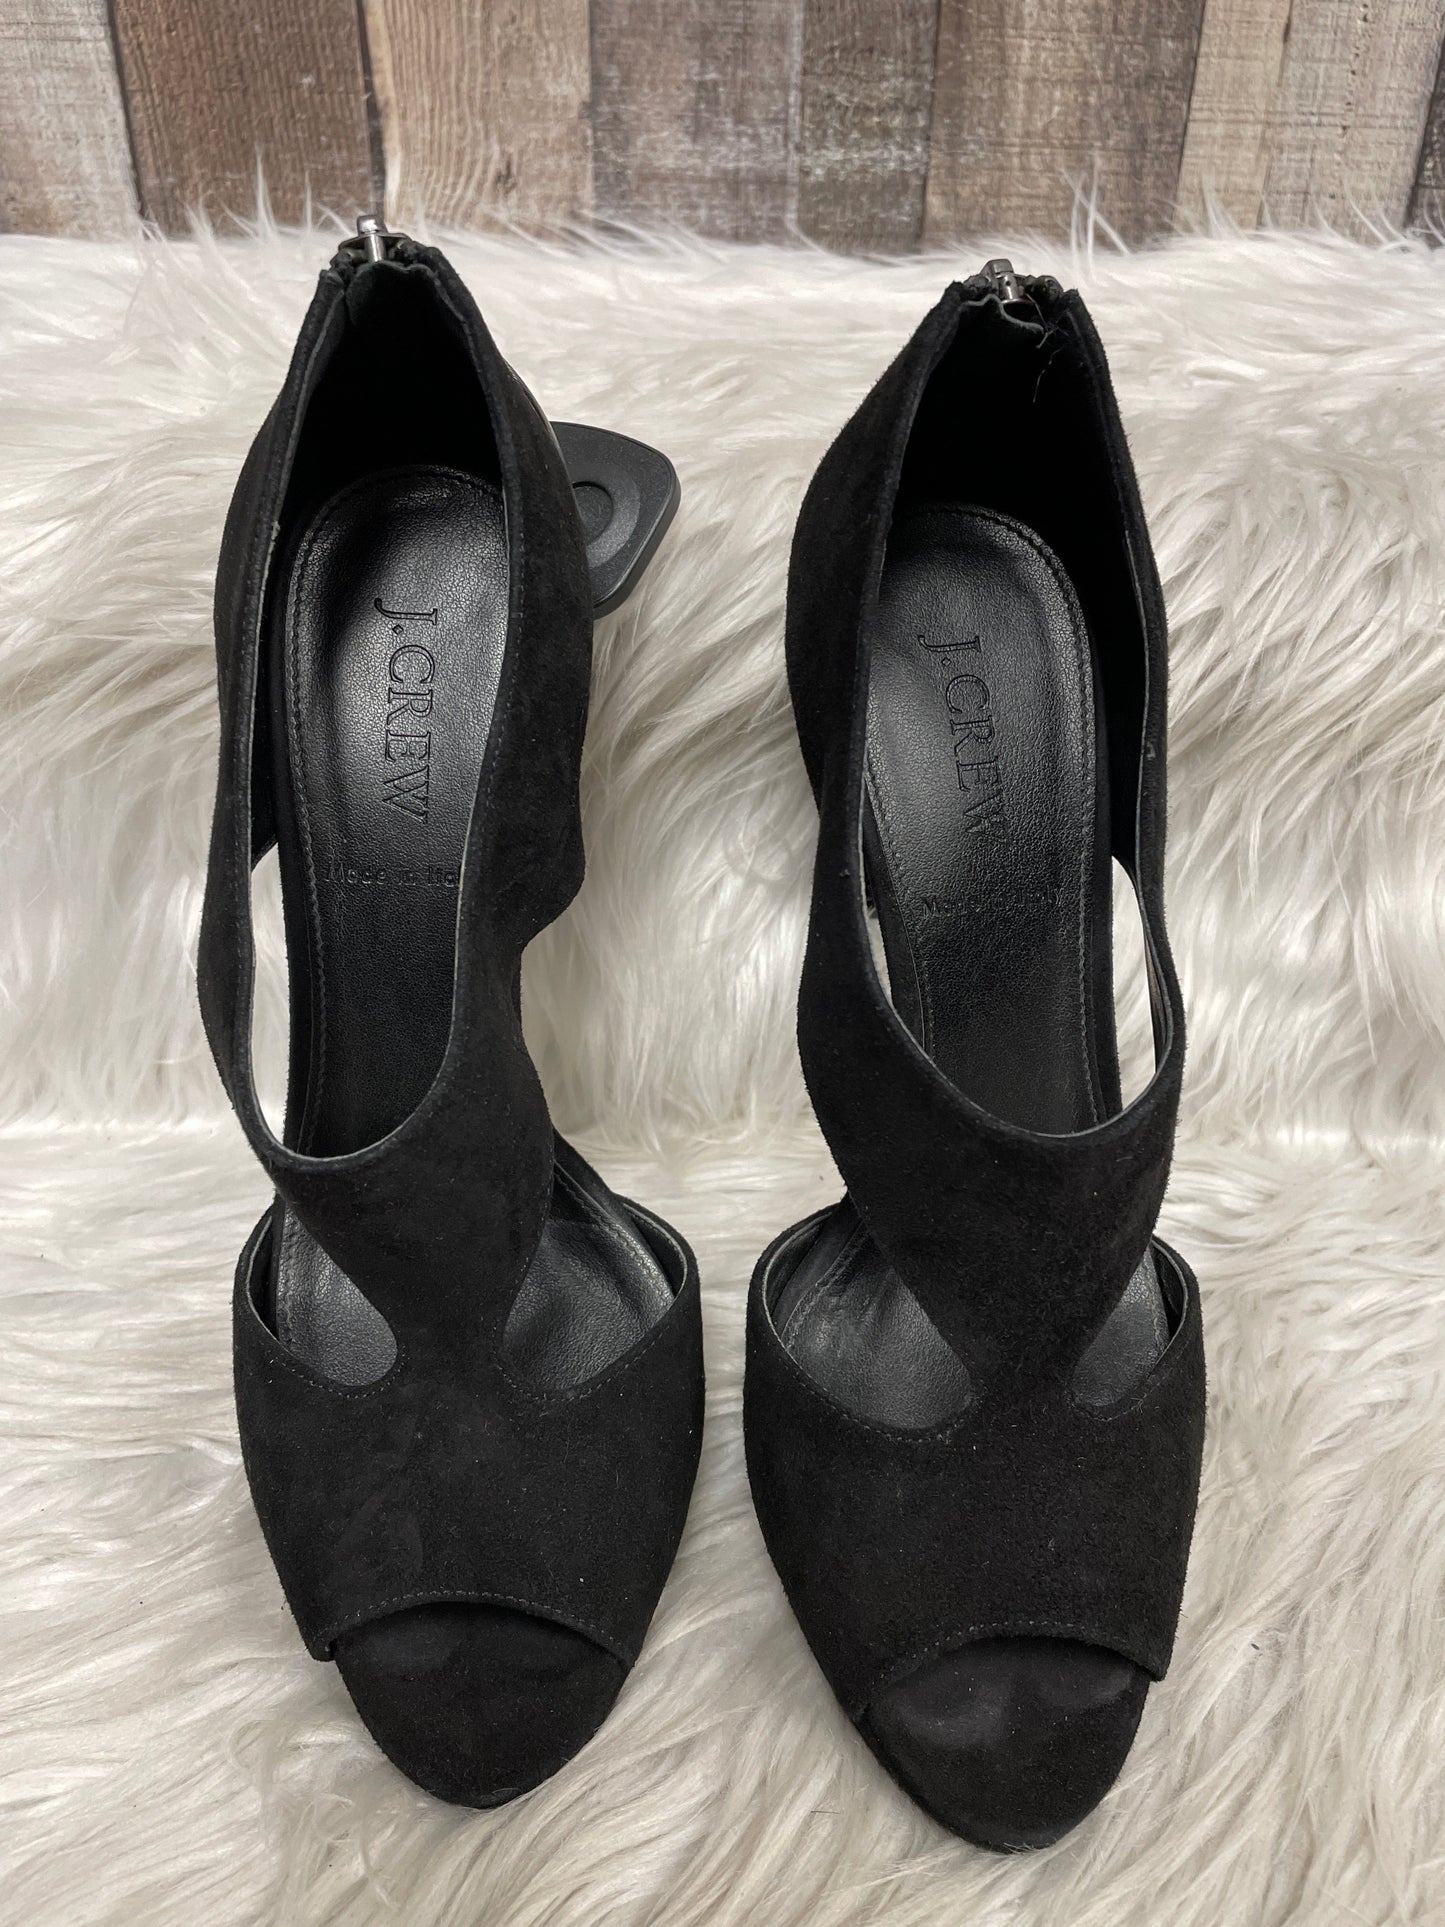 Shoes Heels Stiletto By J Crew  Size: 7.5